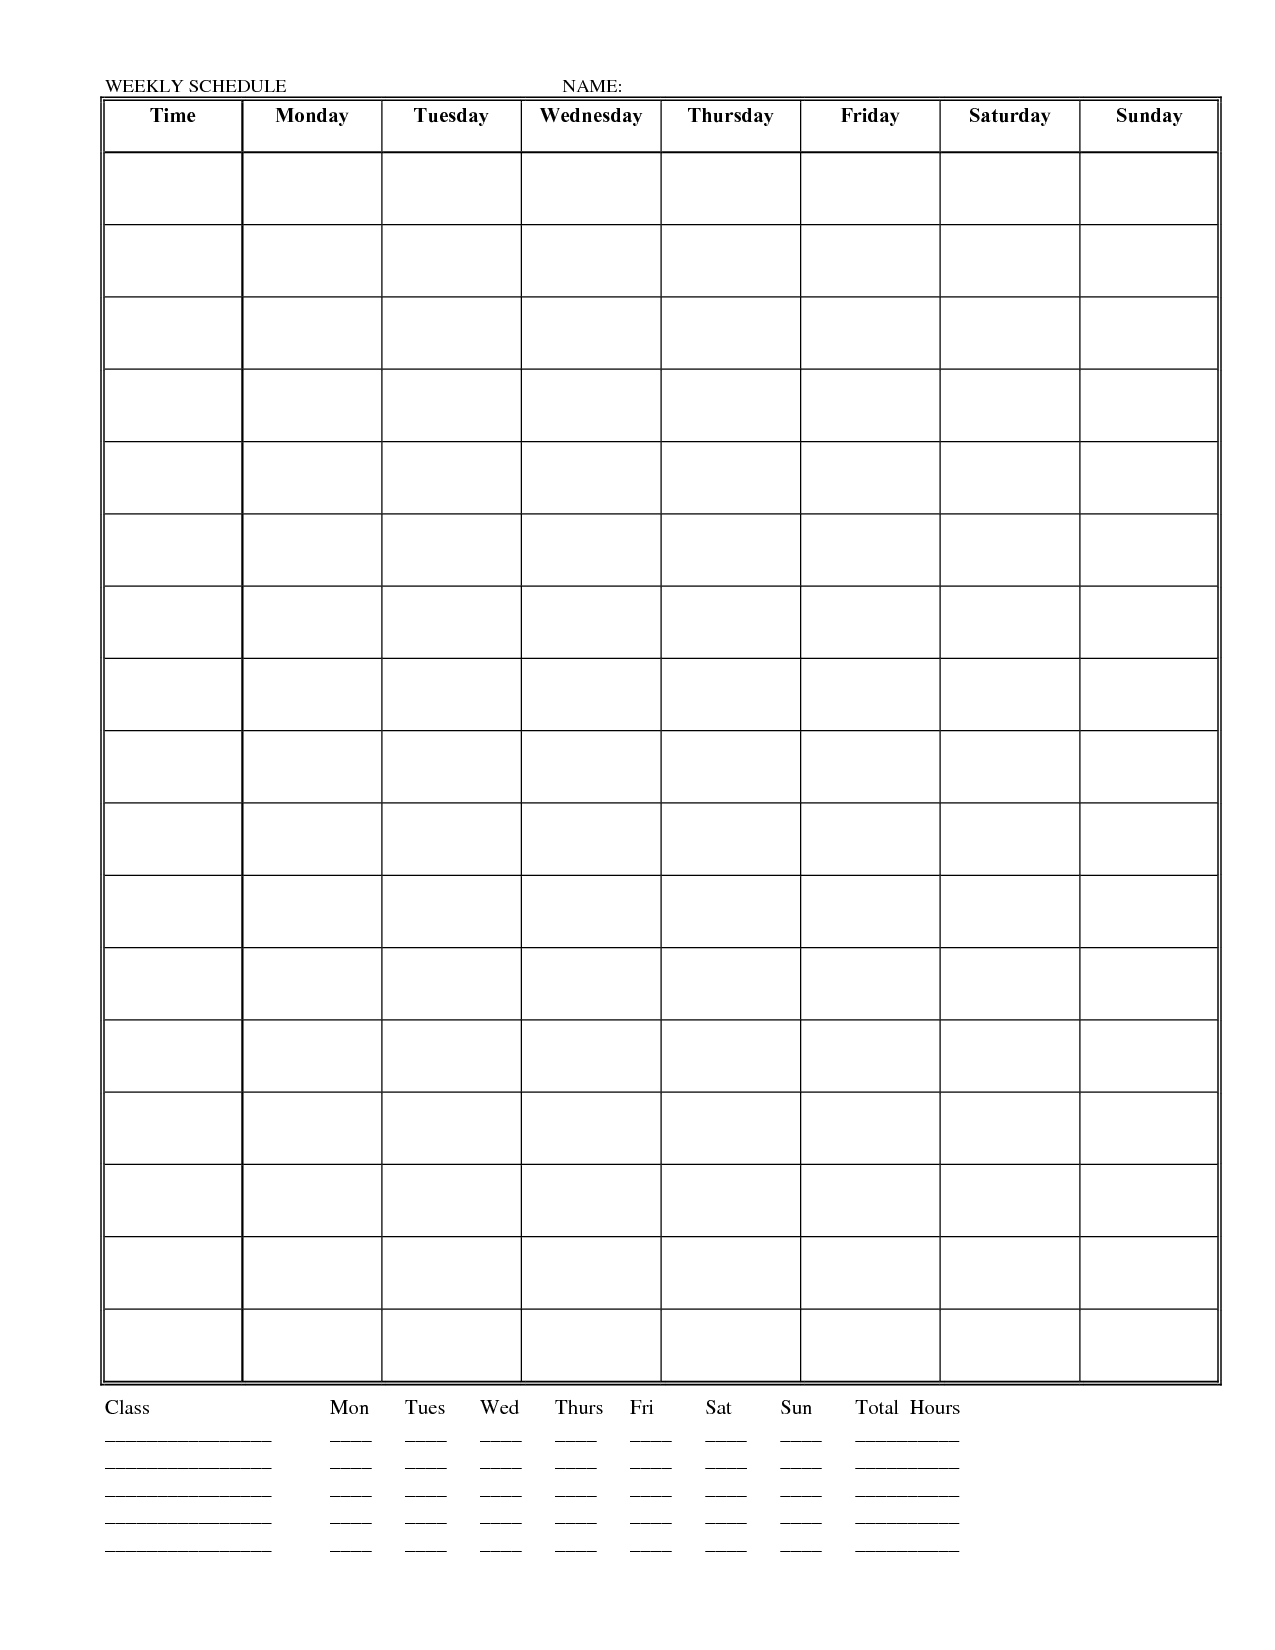 13-blank-weekly-work-schedule-template-images-free-daily-work